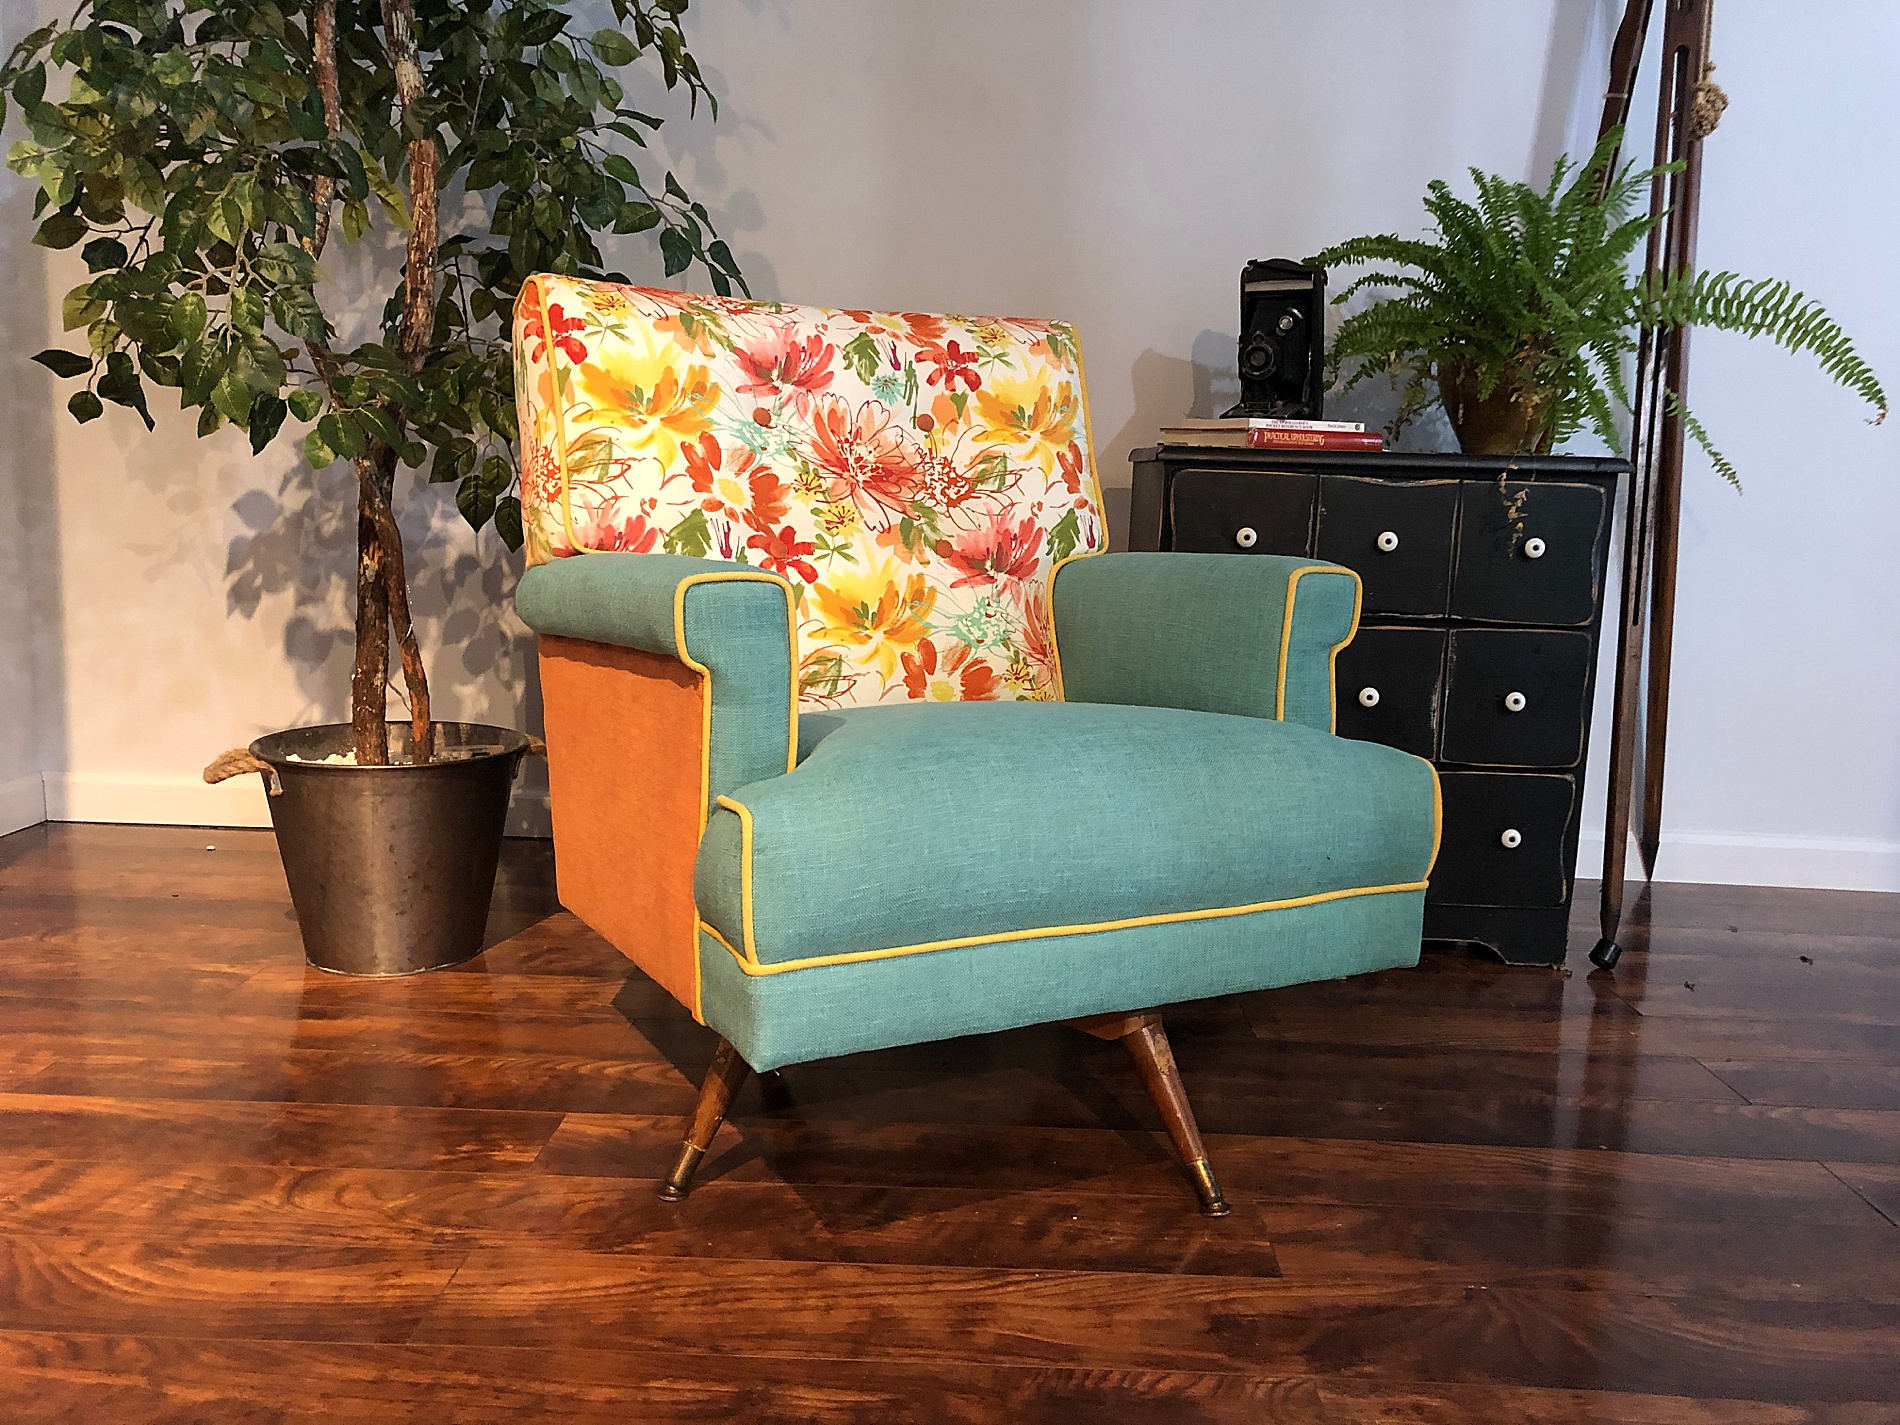 Adding fabric and decorative details to make furniture your own